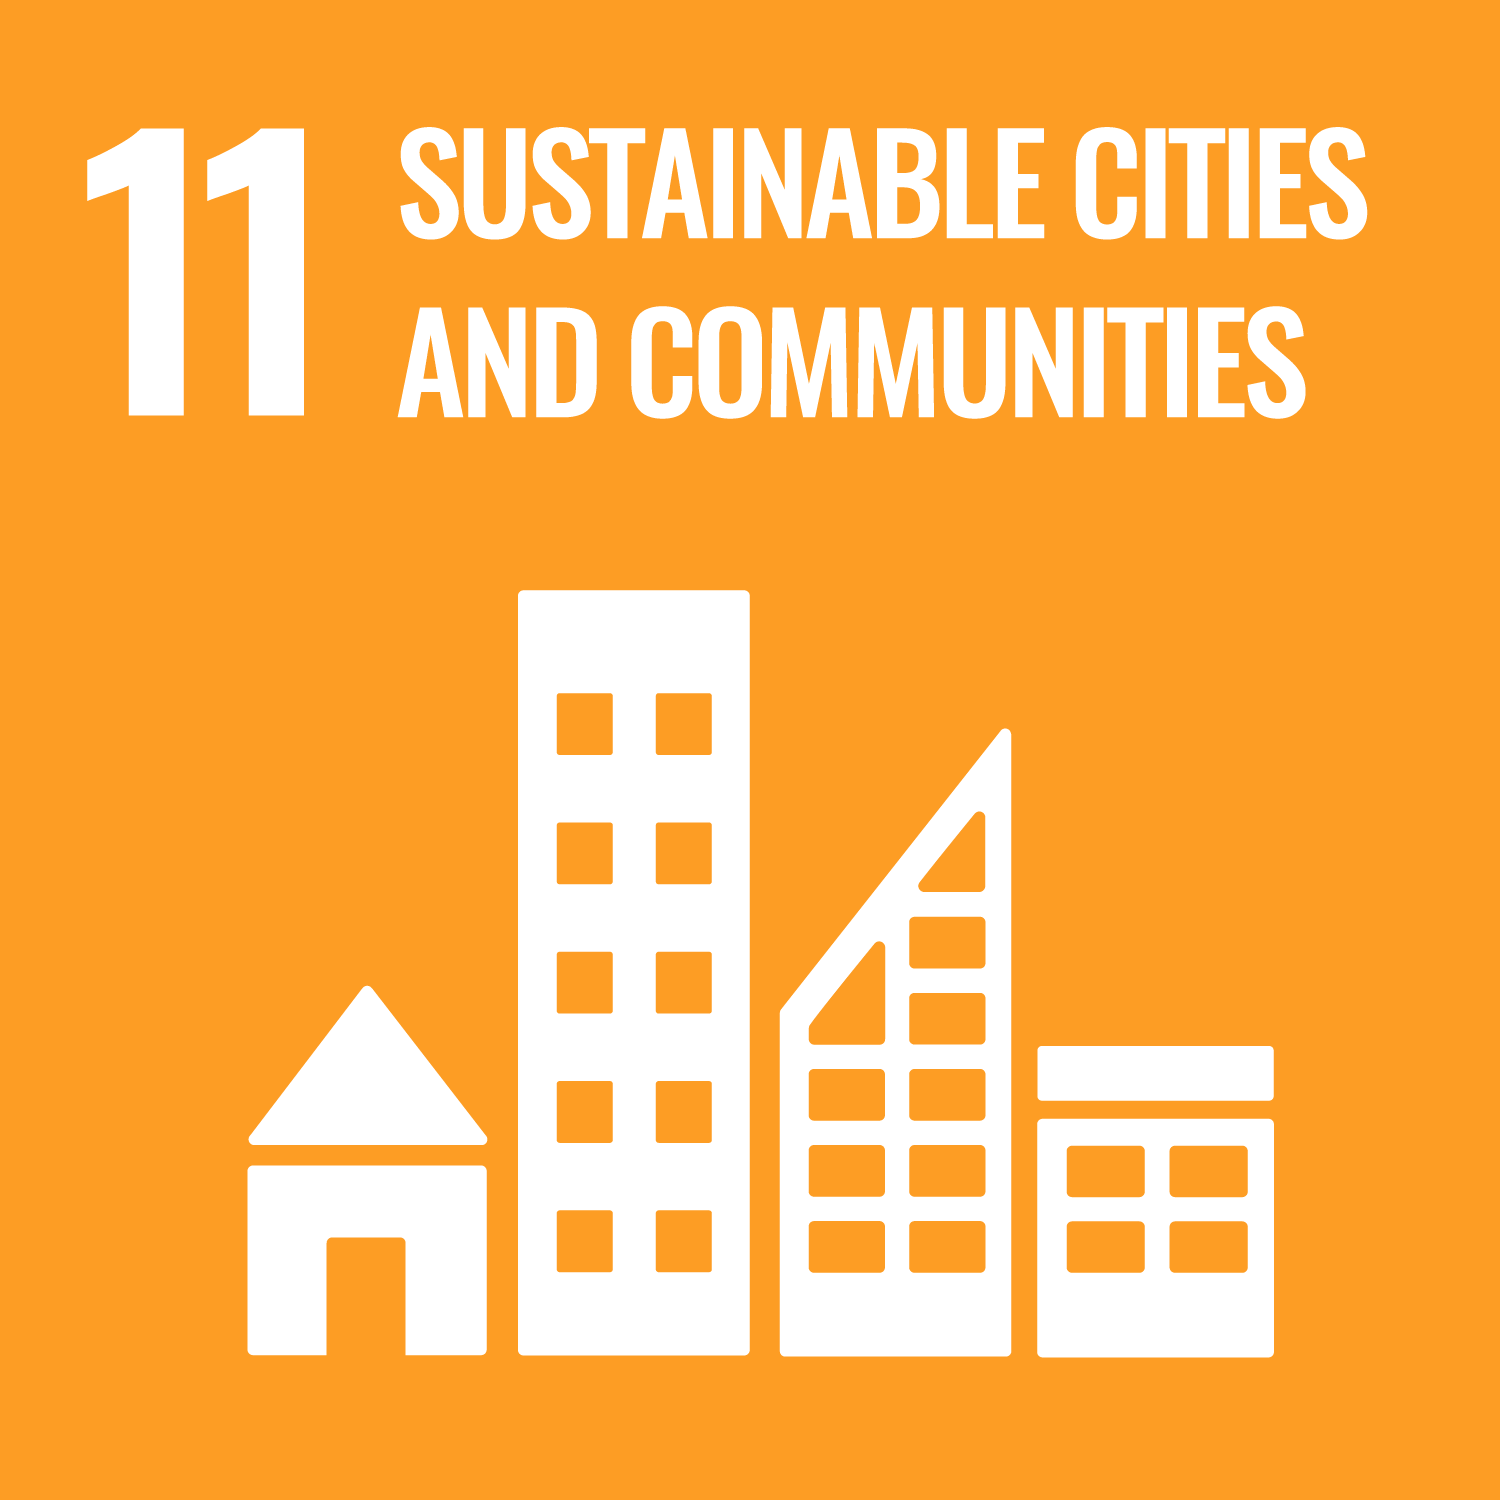 Promoting Local Governments Capacities to Transition Towards People-centred, Smart, Sustainable Cities